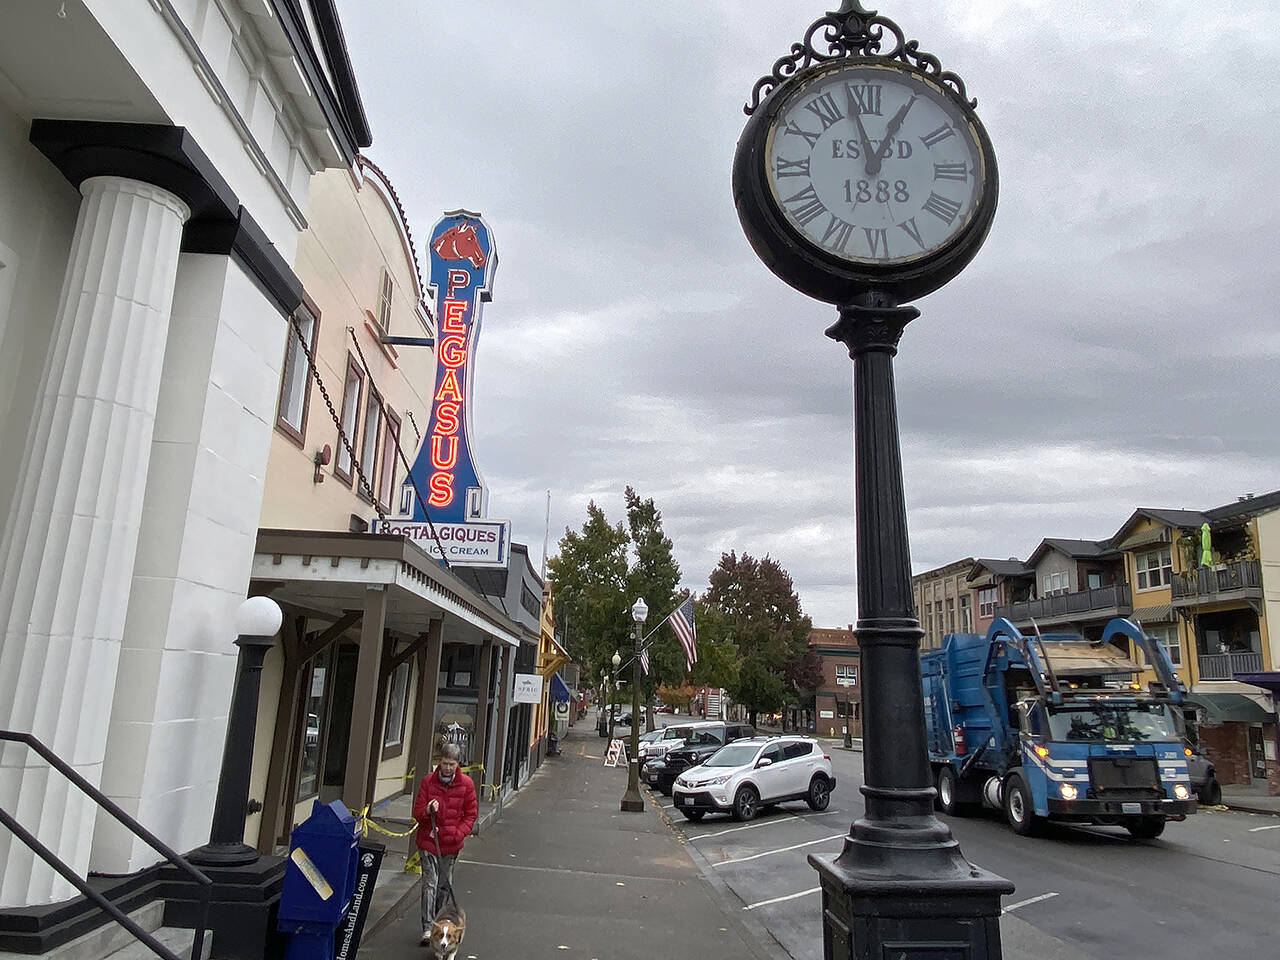 Pubs, restaurants, antique galleries and more await visitors in downtown Snohomish. (Sue Misao / The Herald)